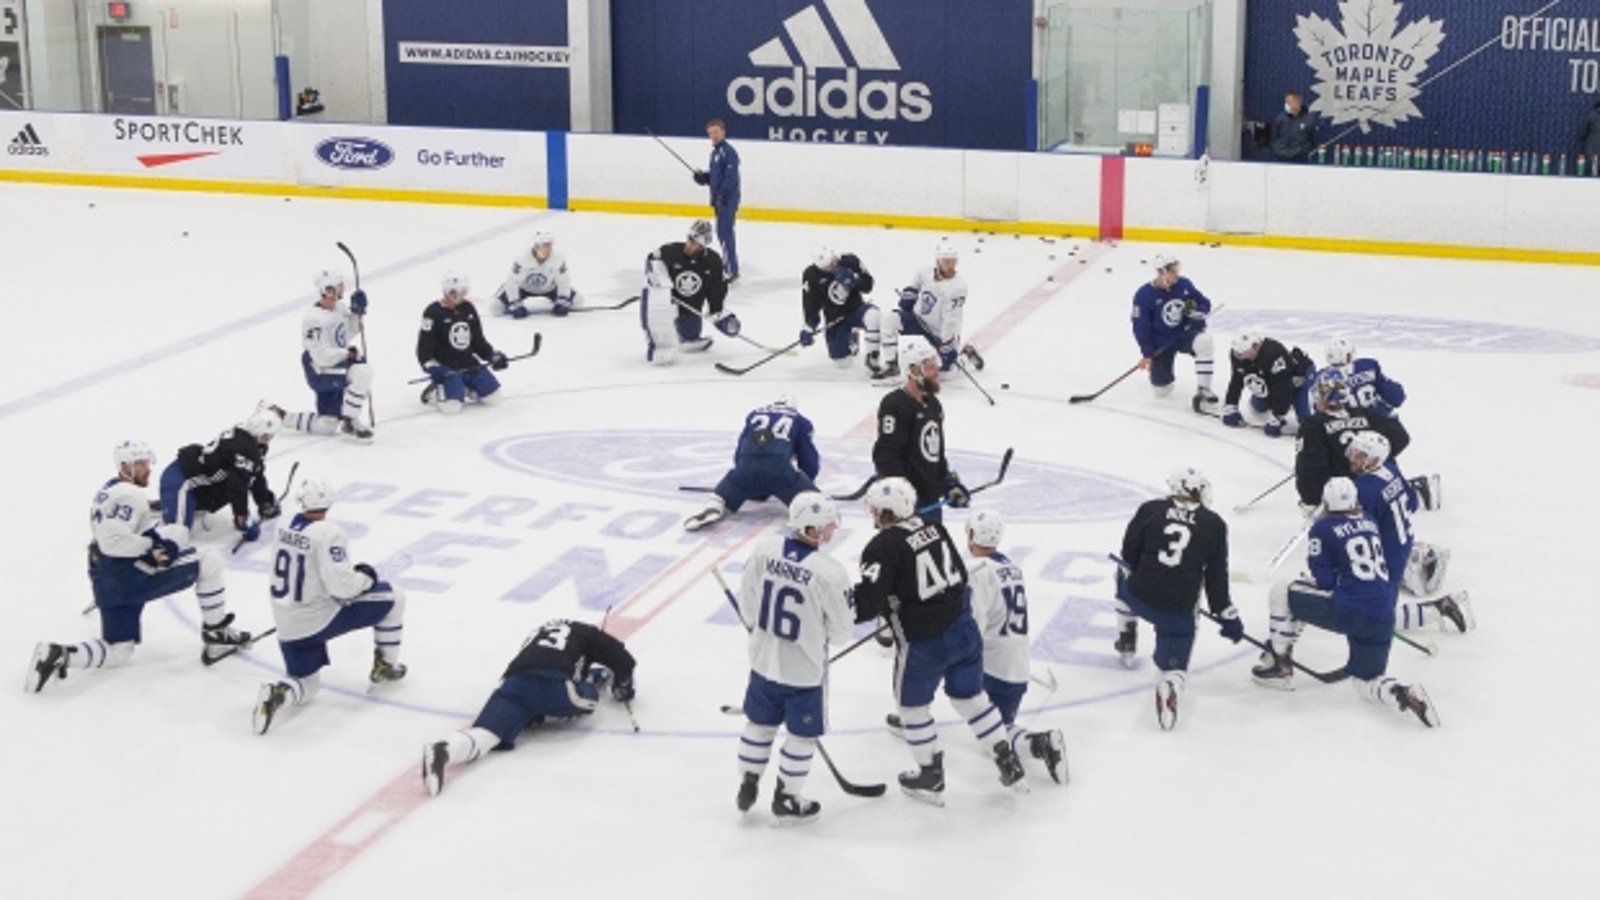 Leafs abruptly change lineup for tonight’s game despite earlier news